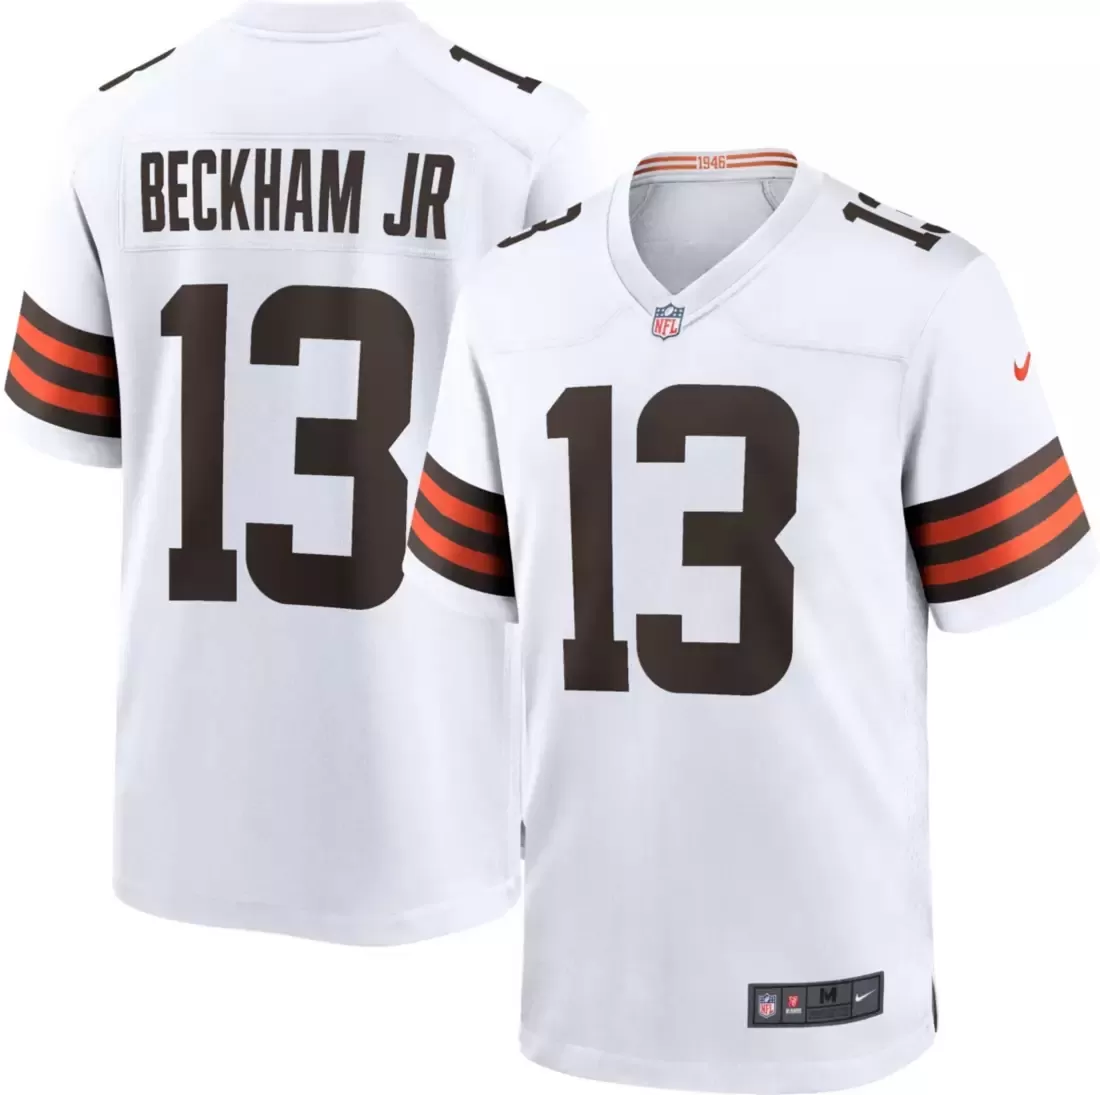 Baker Mayfield Cleveland Browns Dark Brown Nike Game Jersey Size